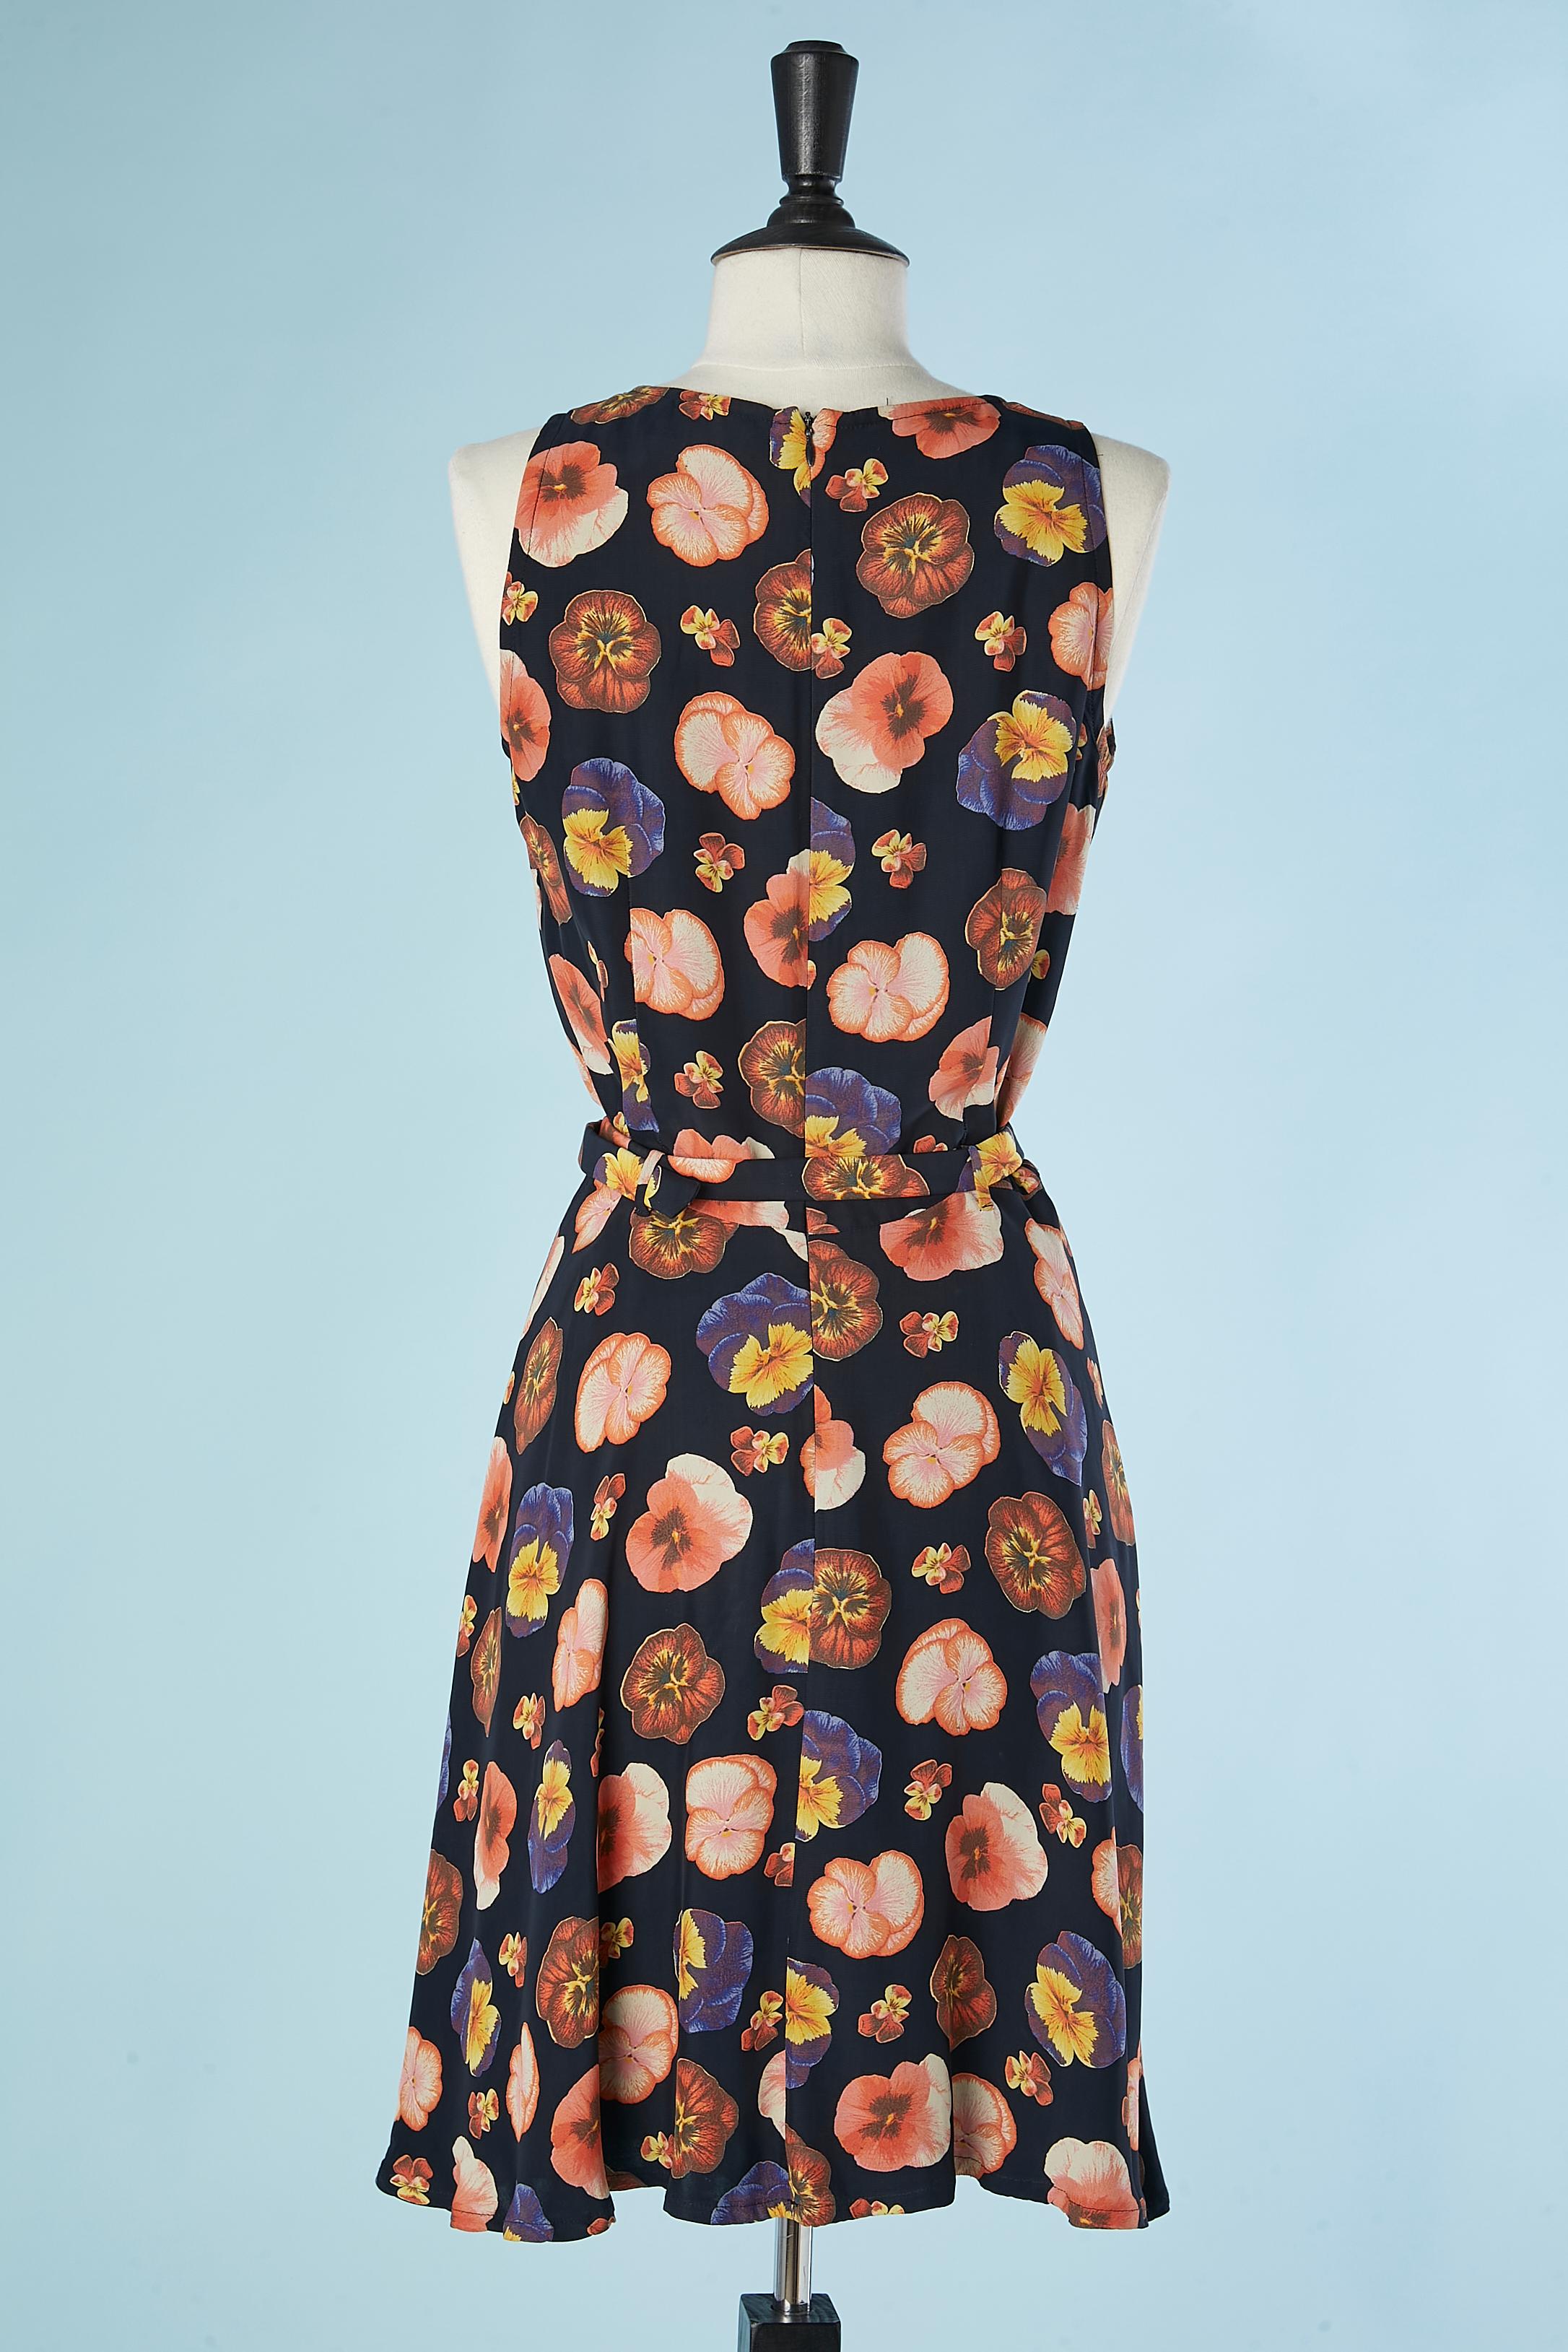 Sleeveless cocktail dress with Pansy print Guy Laroche  In Excellent Condition For Sale In Saint-Ouen-Sur-Seine, FR